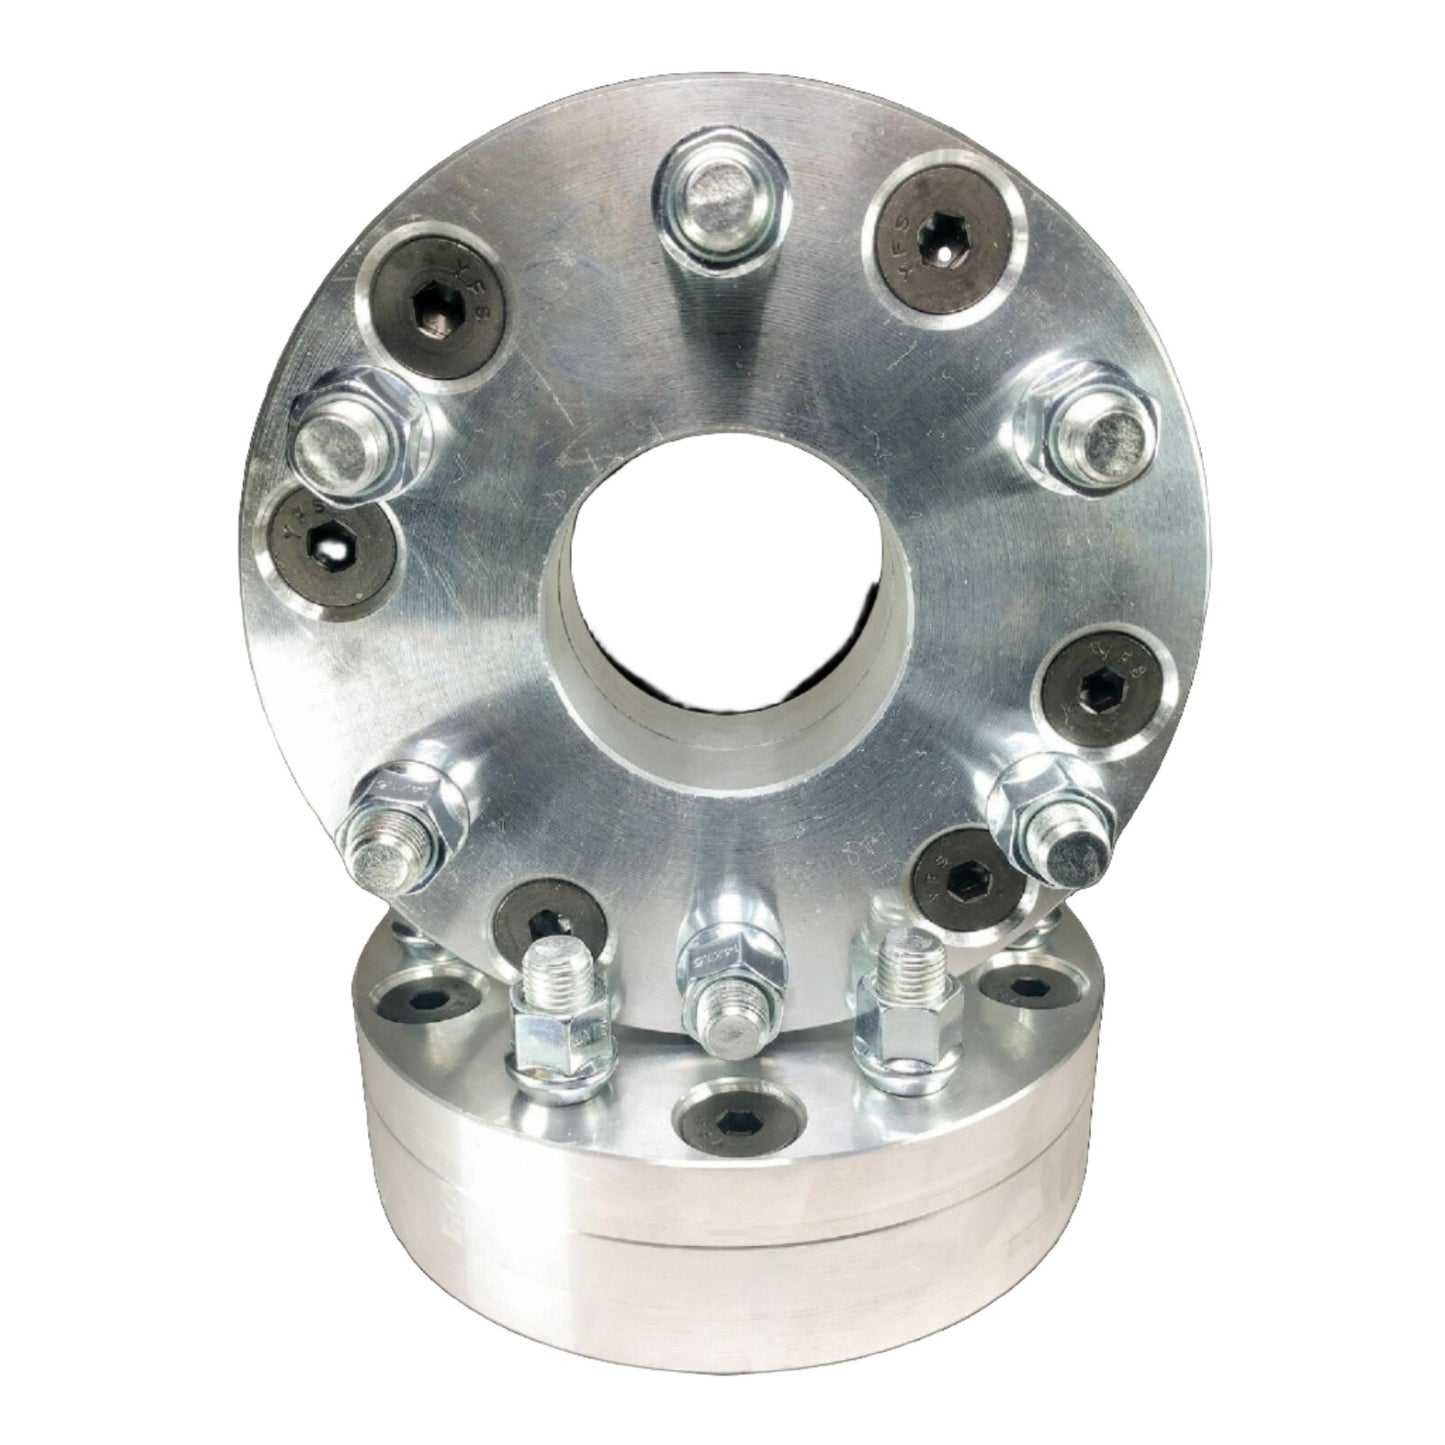 4x130 to 6x5.5" (6x139.7) 2 piece Wheel Adapter - Thickness: 1.75" - 3"